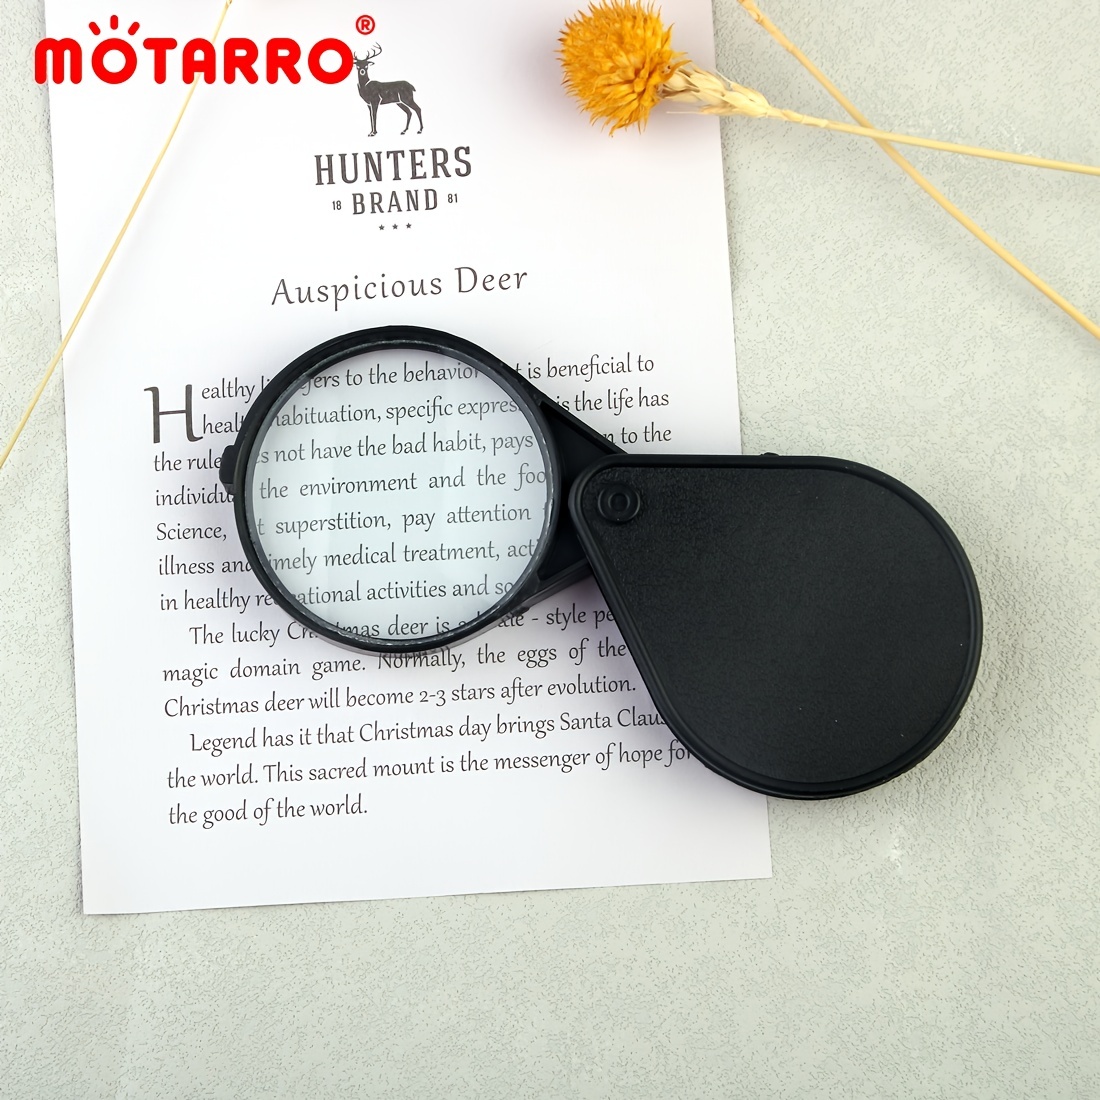 10X Small Magnifying Glass Mini Pocket Magnifier Folding Magnify Glasses  With Rotating Protective Holster For Seniors